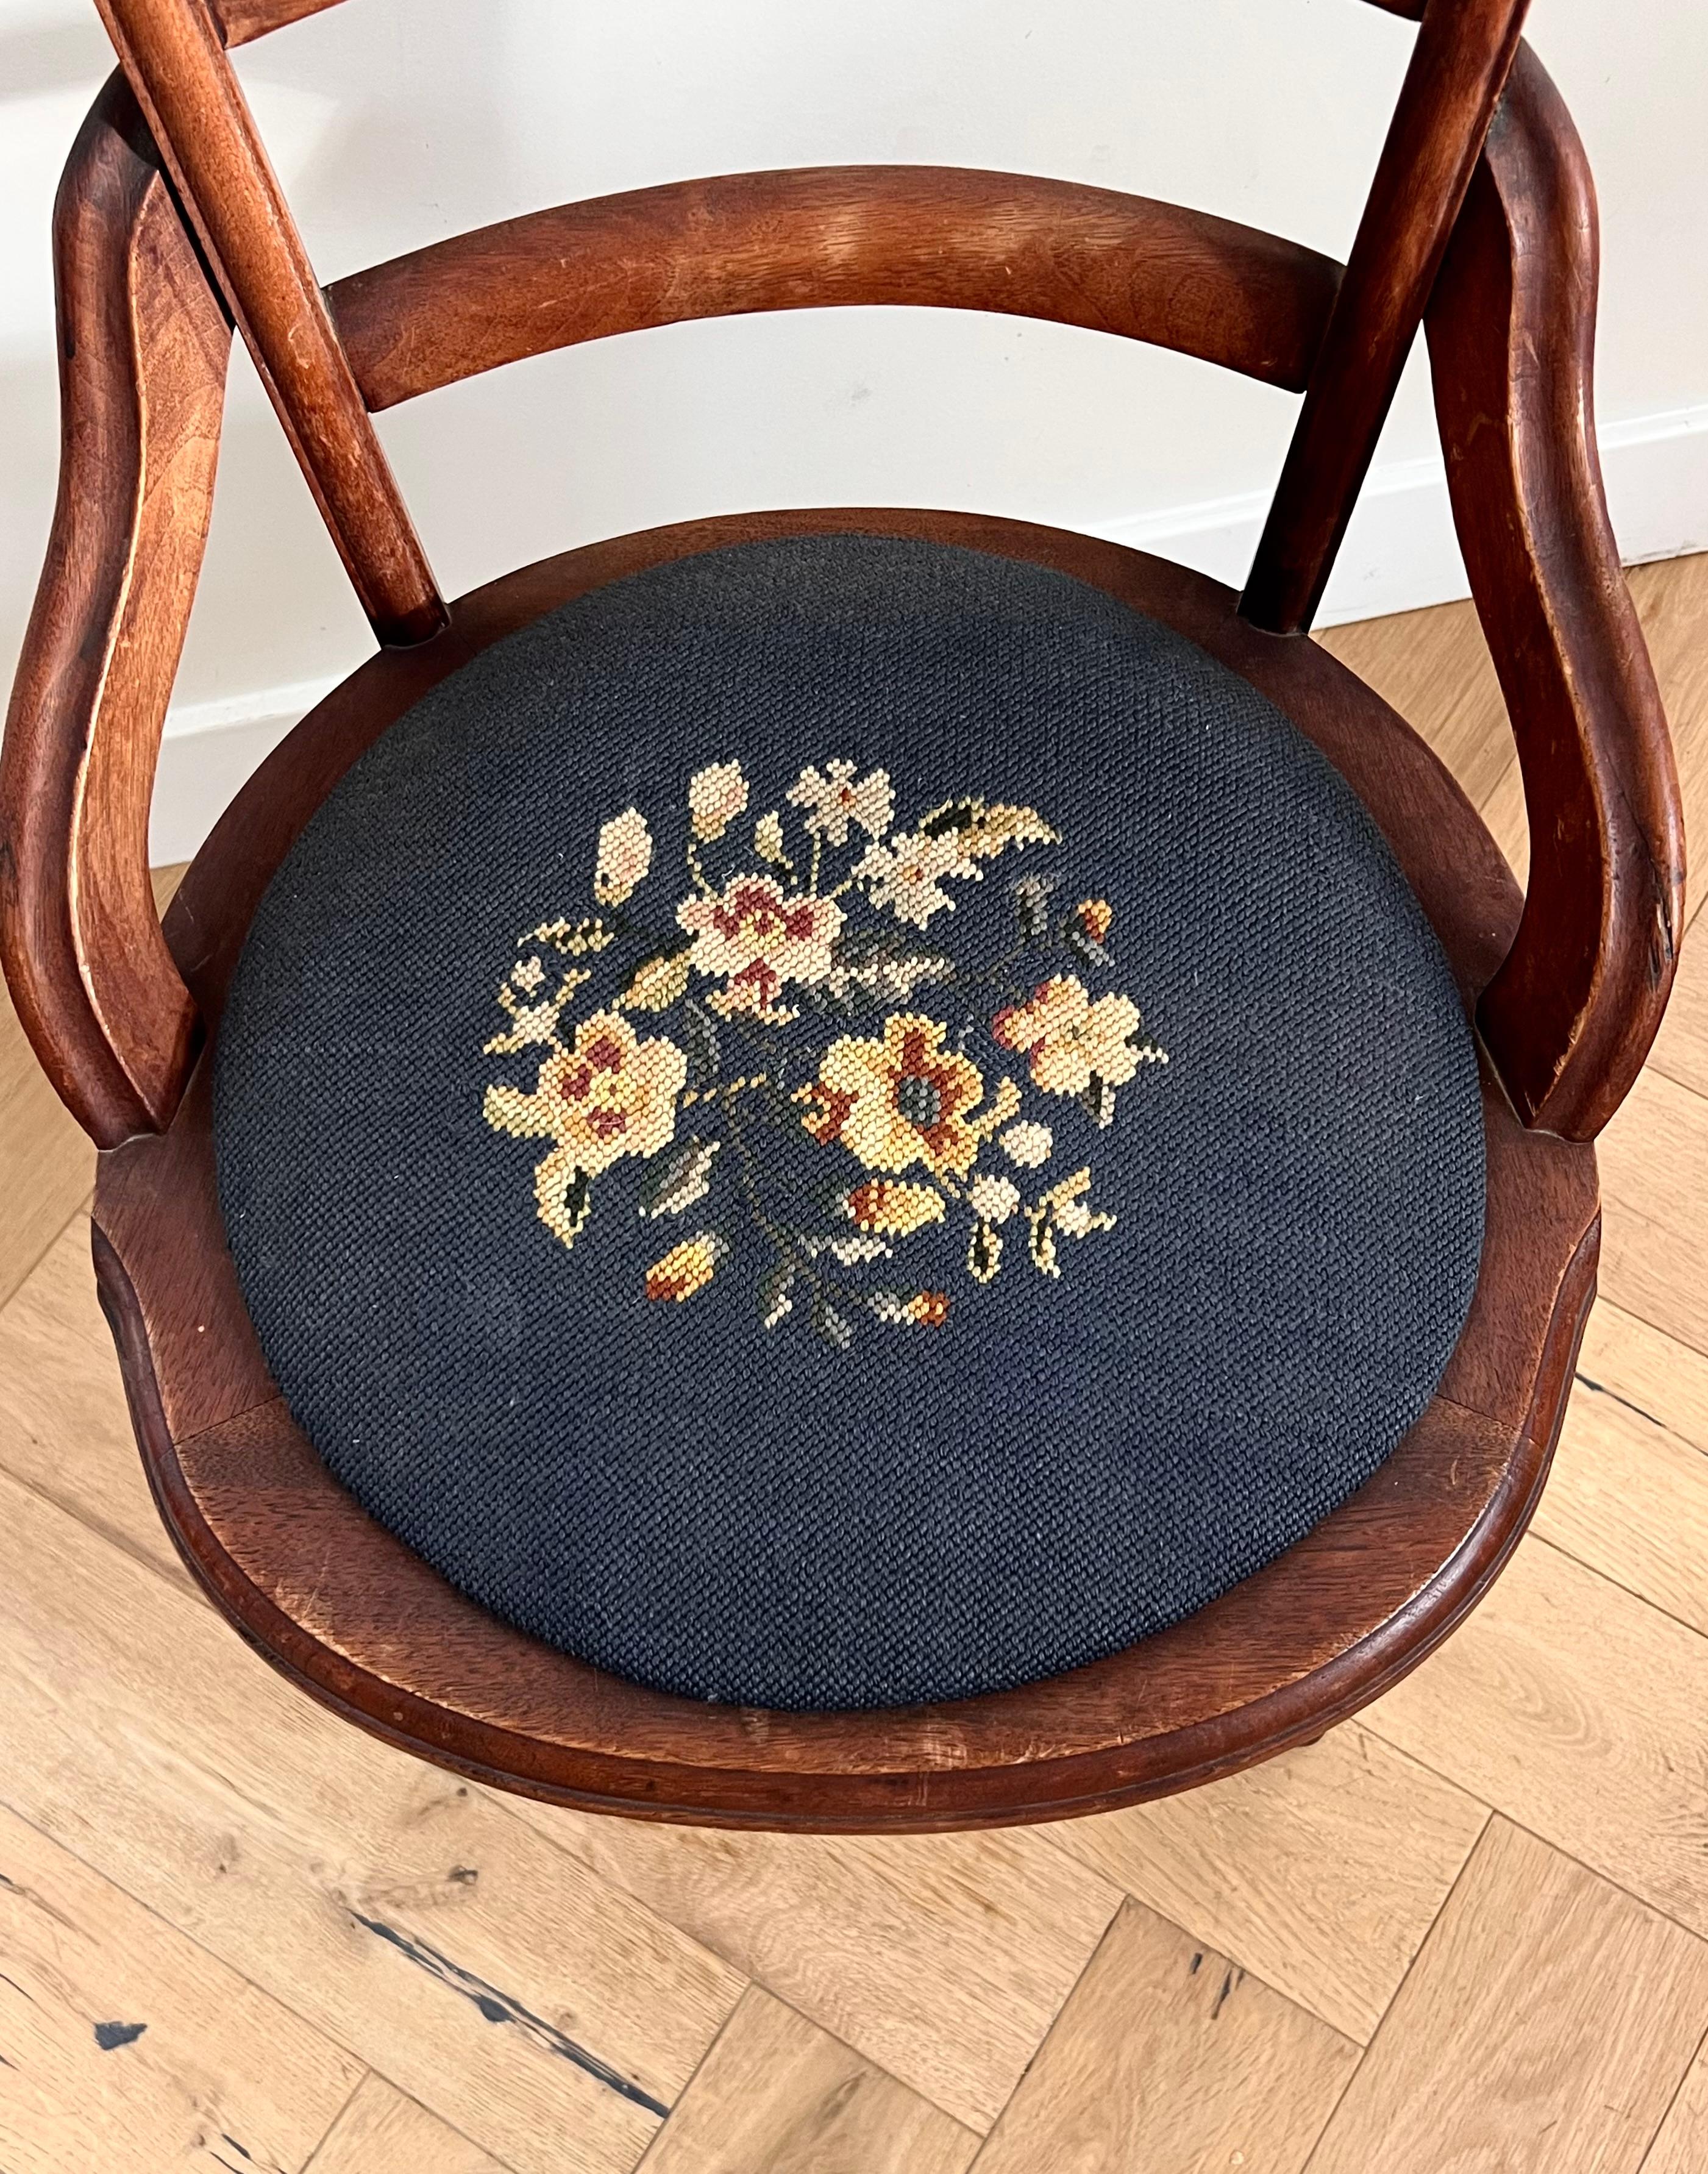 Antique Wooden Chair with Embroidered Needlepoint Seat, Early 20th Century For Sale 2